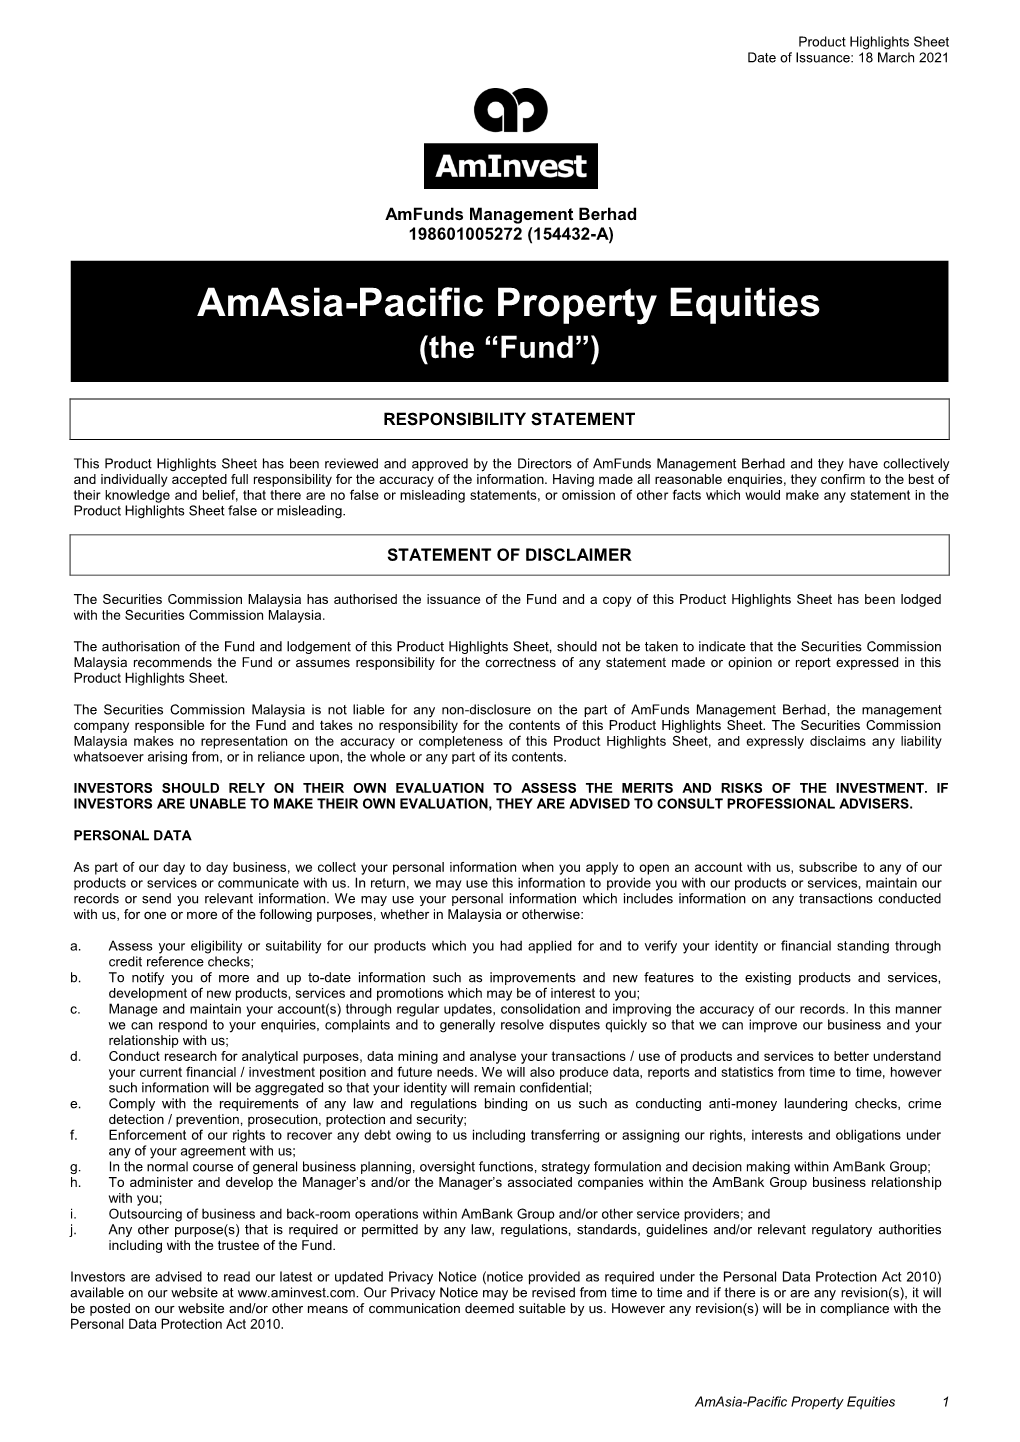 Amasia-Pacific Property Equities (The “Fund”)